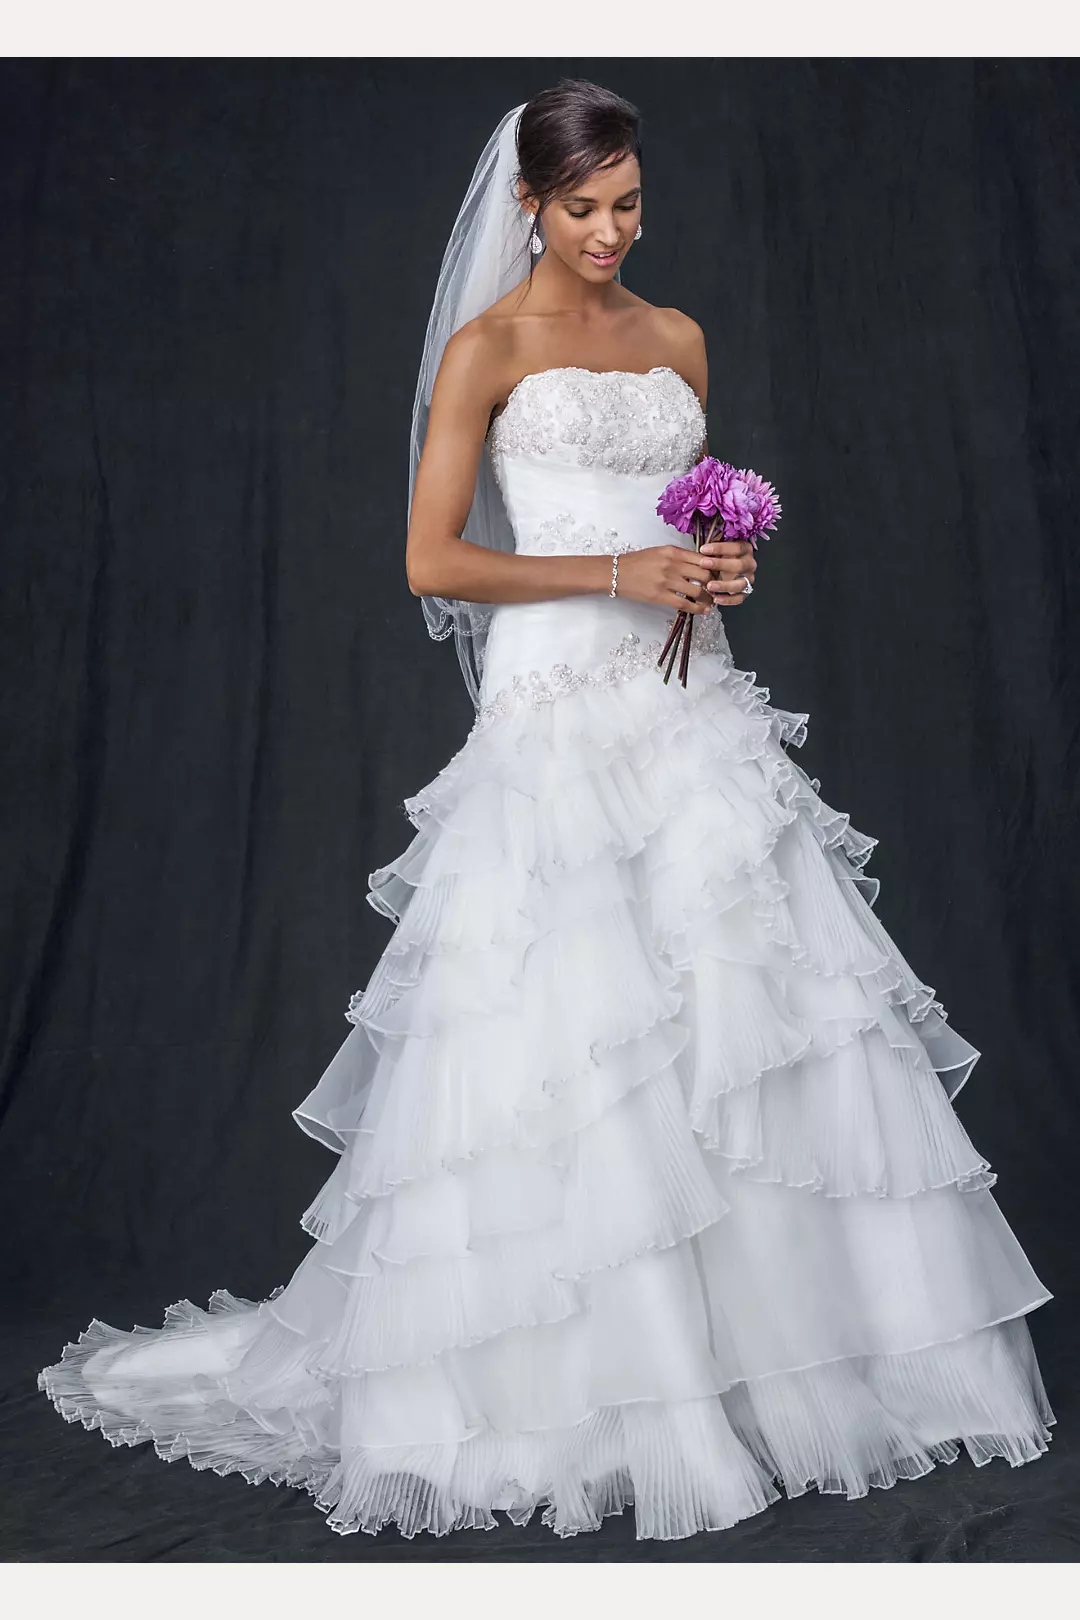 Pleated Wedding Dress with Tiers and Lace-Up Back  Image